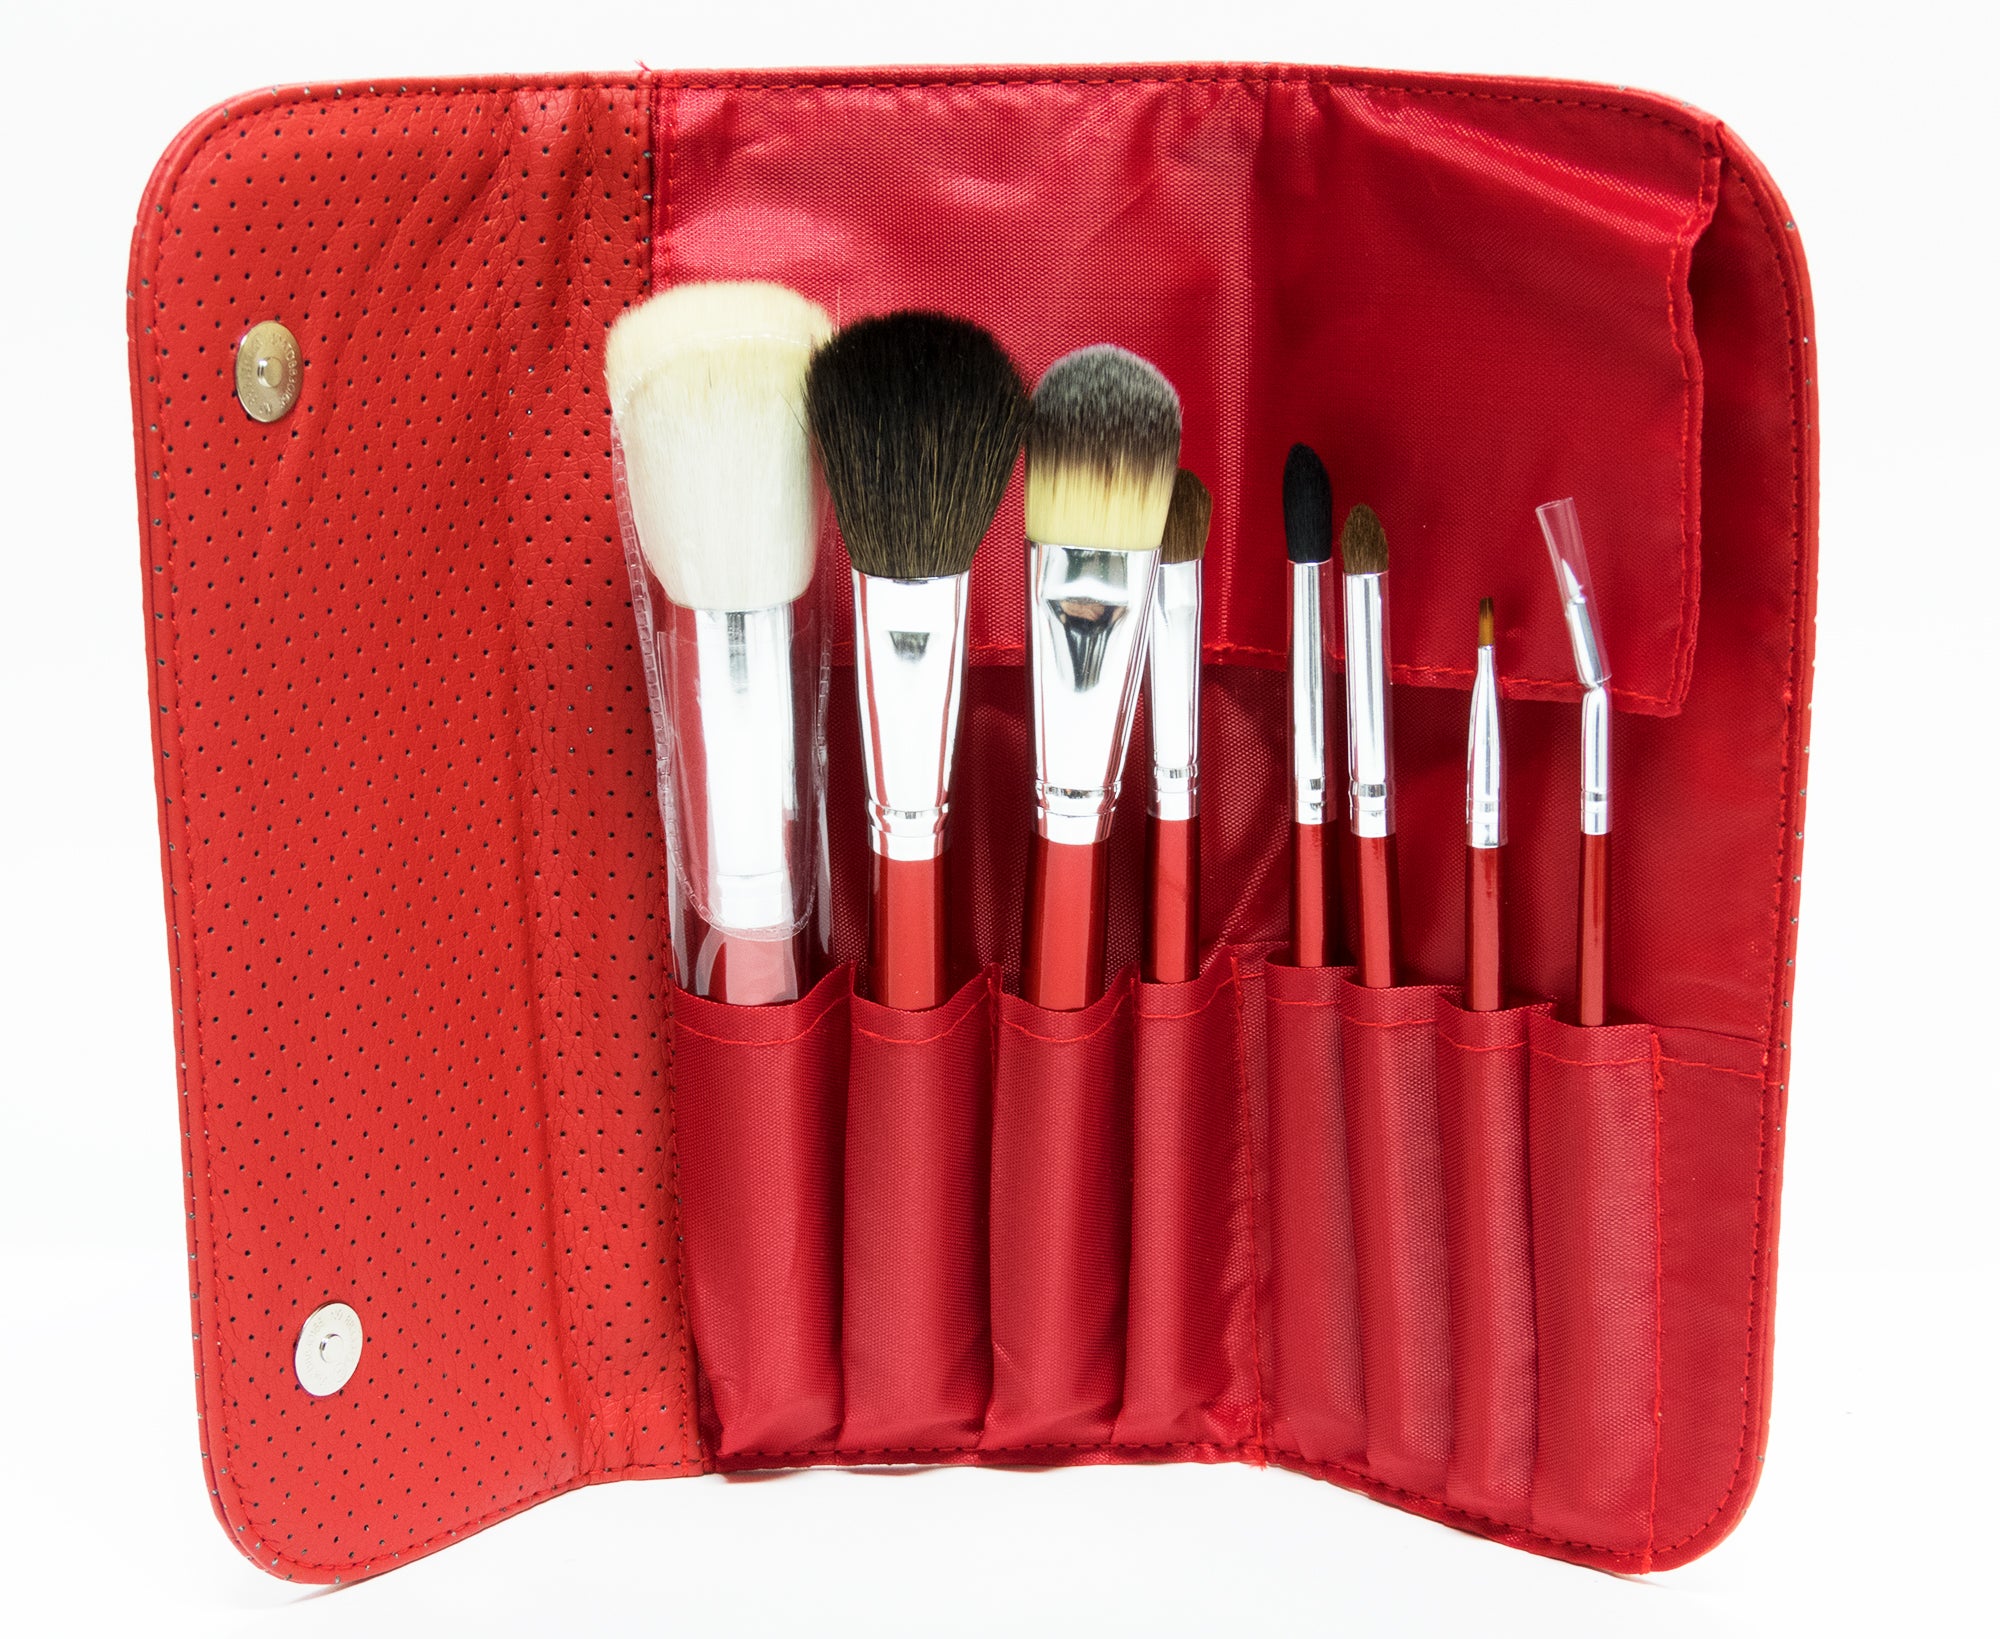 Morphe 8 Piece Candy Apple Red Brush Set – My Beauty Treasures